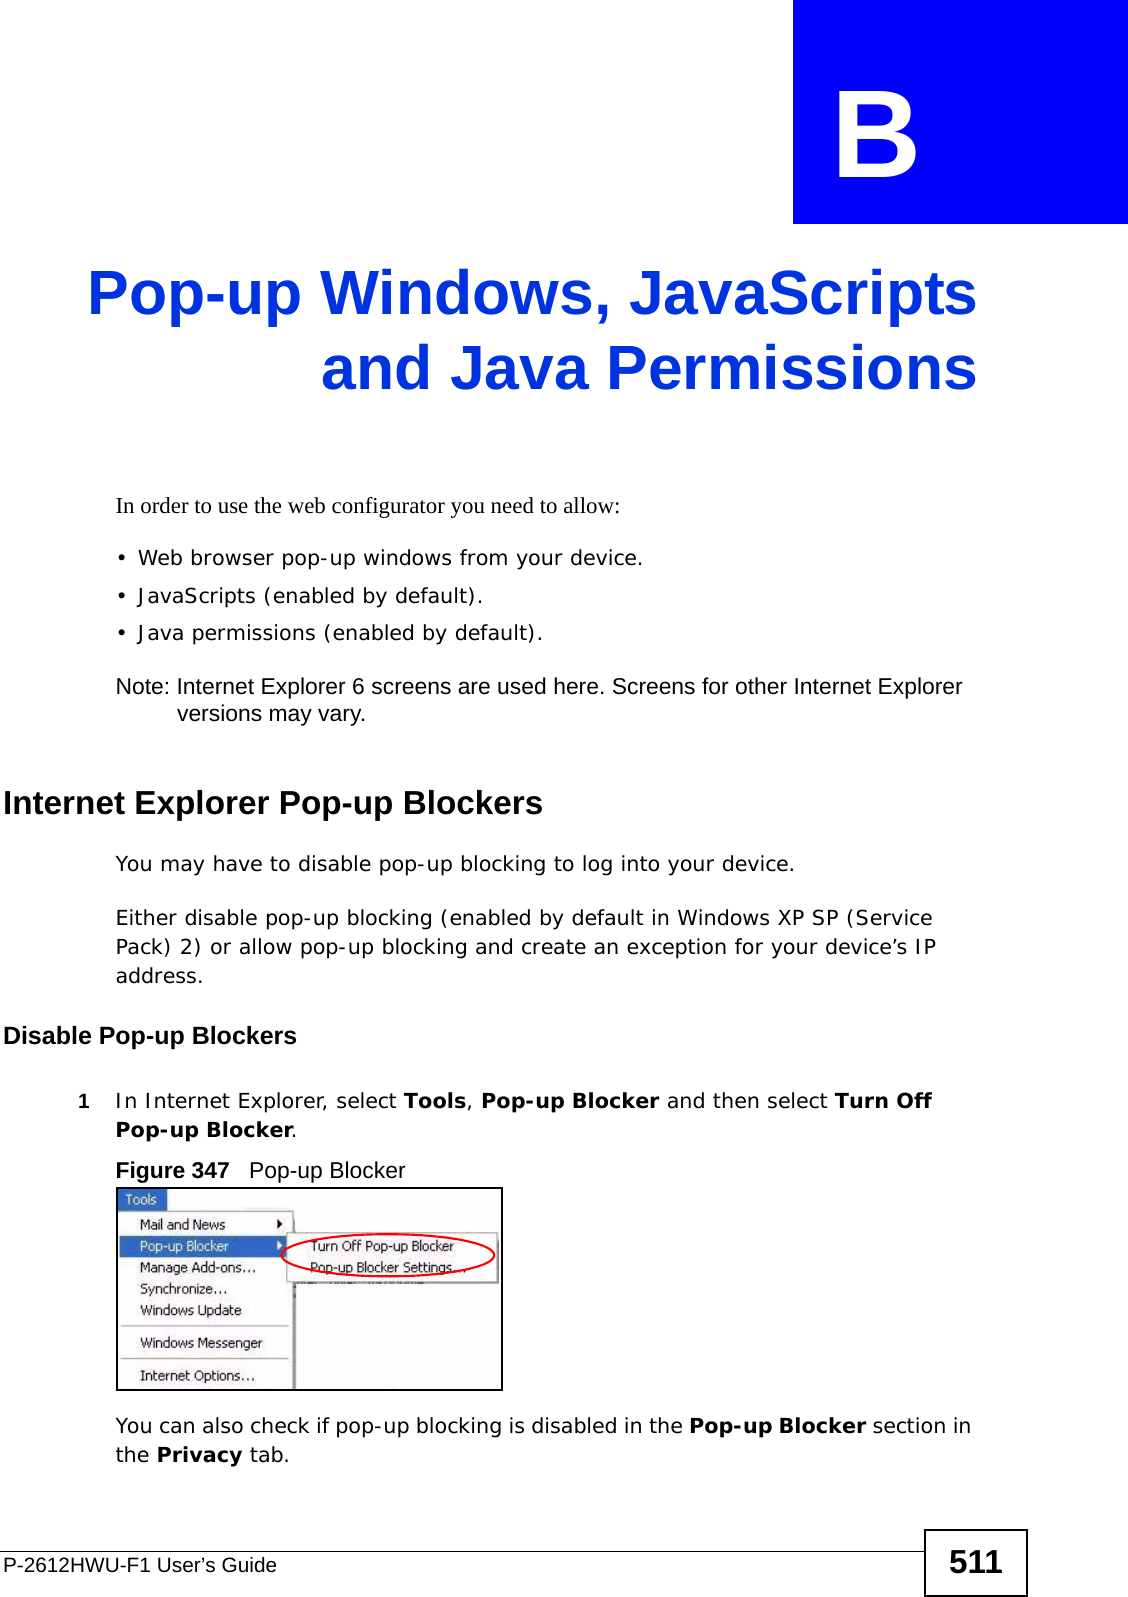 P-2612HWU-F1 User’s Guide 511APPENDIX  B Pop-up Windows, JavaScriptsand Java PermissionsIn order to use the web configurator you need to allow:• Web browser pop-up windows from your device.• JavaScripts (enabled by default).• Java permissions (enabled by default).Note: Internet Explorer 6 screens are used here. Screens for other Internet Explorer versions may vary.Internet Explorer Pop-up BlockersYou may have to disable pop-up blocking to log into your device. Either disable pop-up blocking (enabled by default in Windows XP SP (Service Pack) 2) or allow pop-up blocking and create an exception for your device’s IP address.Disable Pop-up Blockers1In Internet Explorer, select Tools, Pop-up Blocker and then select Turn Off Pop-up Blocker. Figure 347   Pop-up BlockerYou can also check if pop-up blocking is disabled in the Pop-up Blocker section in the Privacy tab. 